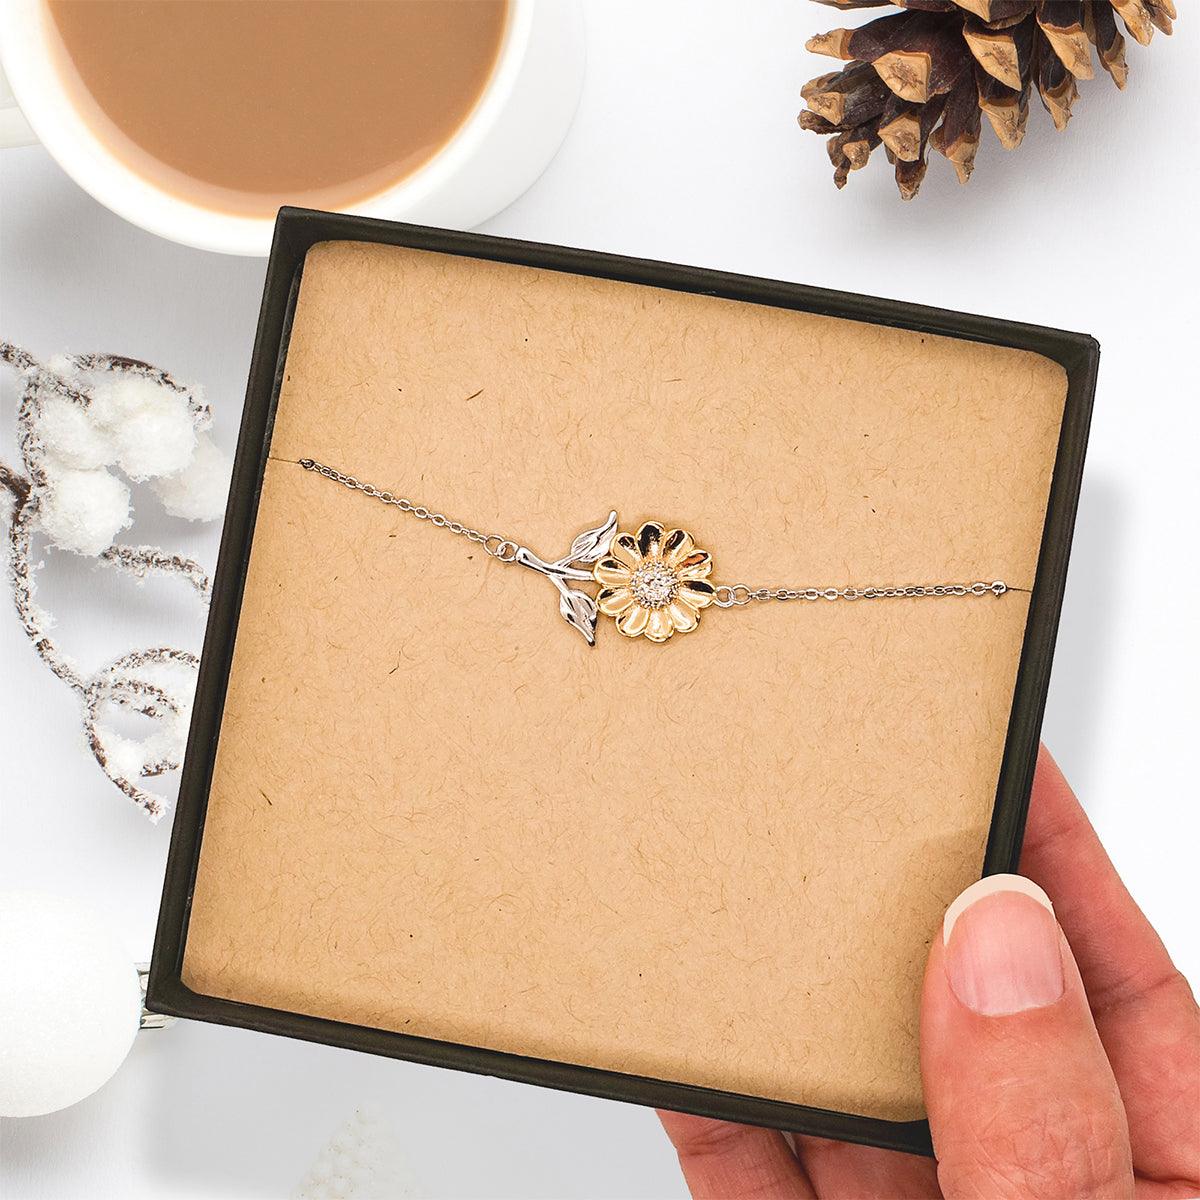 Remarkable Marketing Manager Gifts, Your dedication and hard work, Inspirational Birthday Christmas Unique Sunflower Bracelet For Marketing Manager, Coworkers, Men, Women, Friends - Mallard Moon Gift Shop